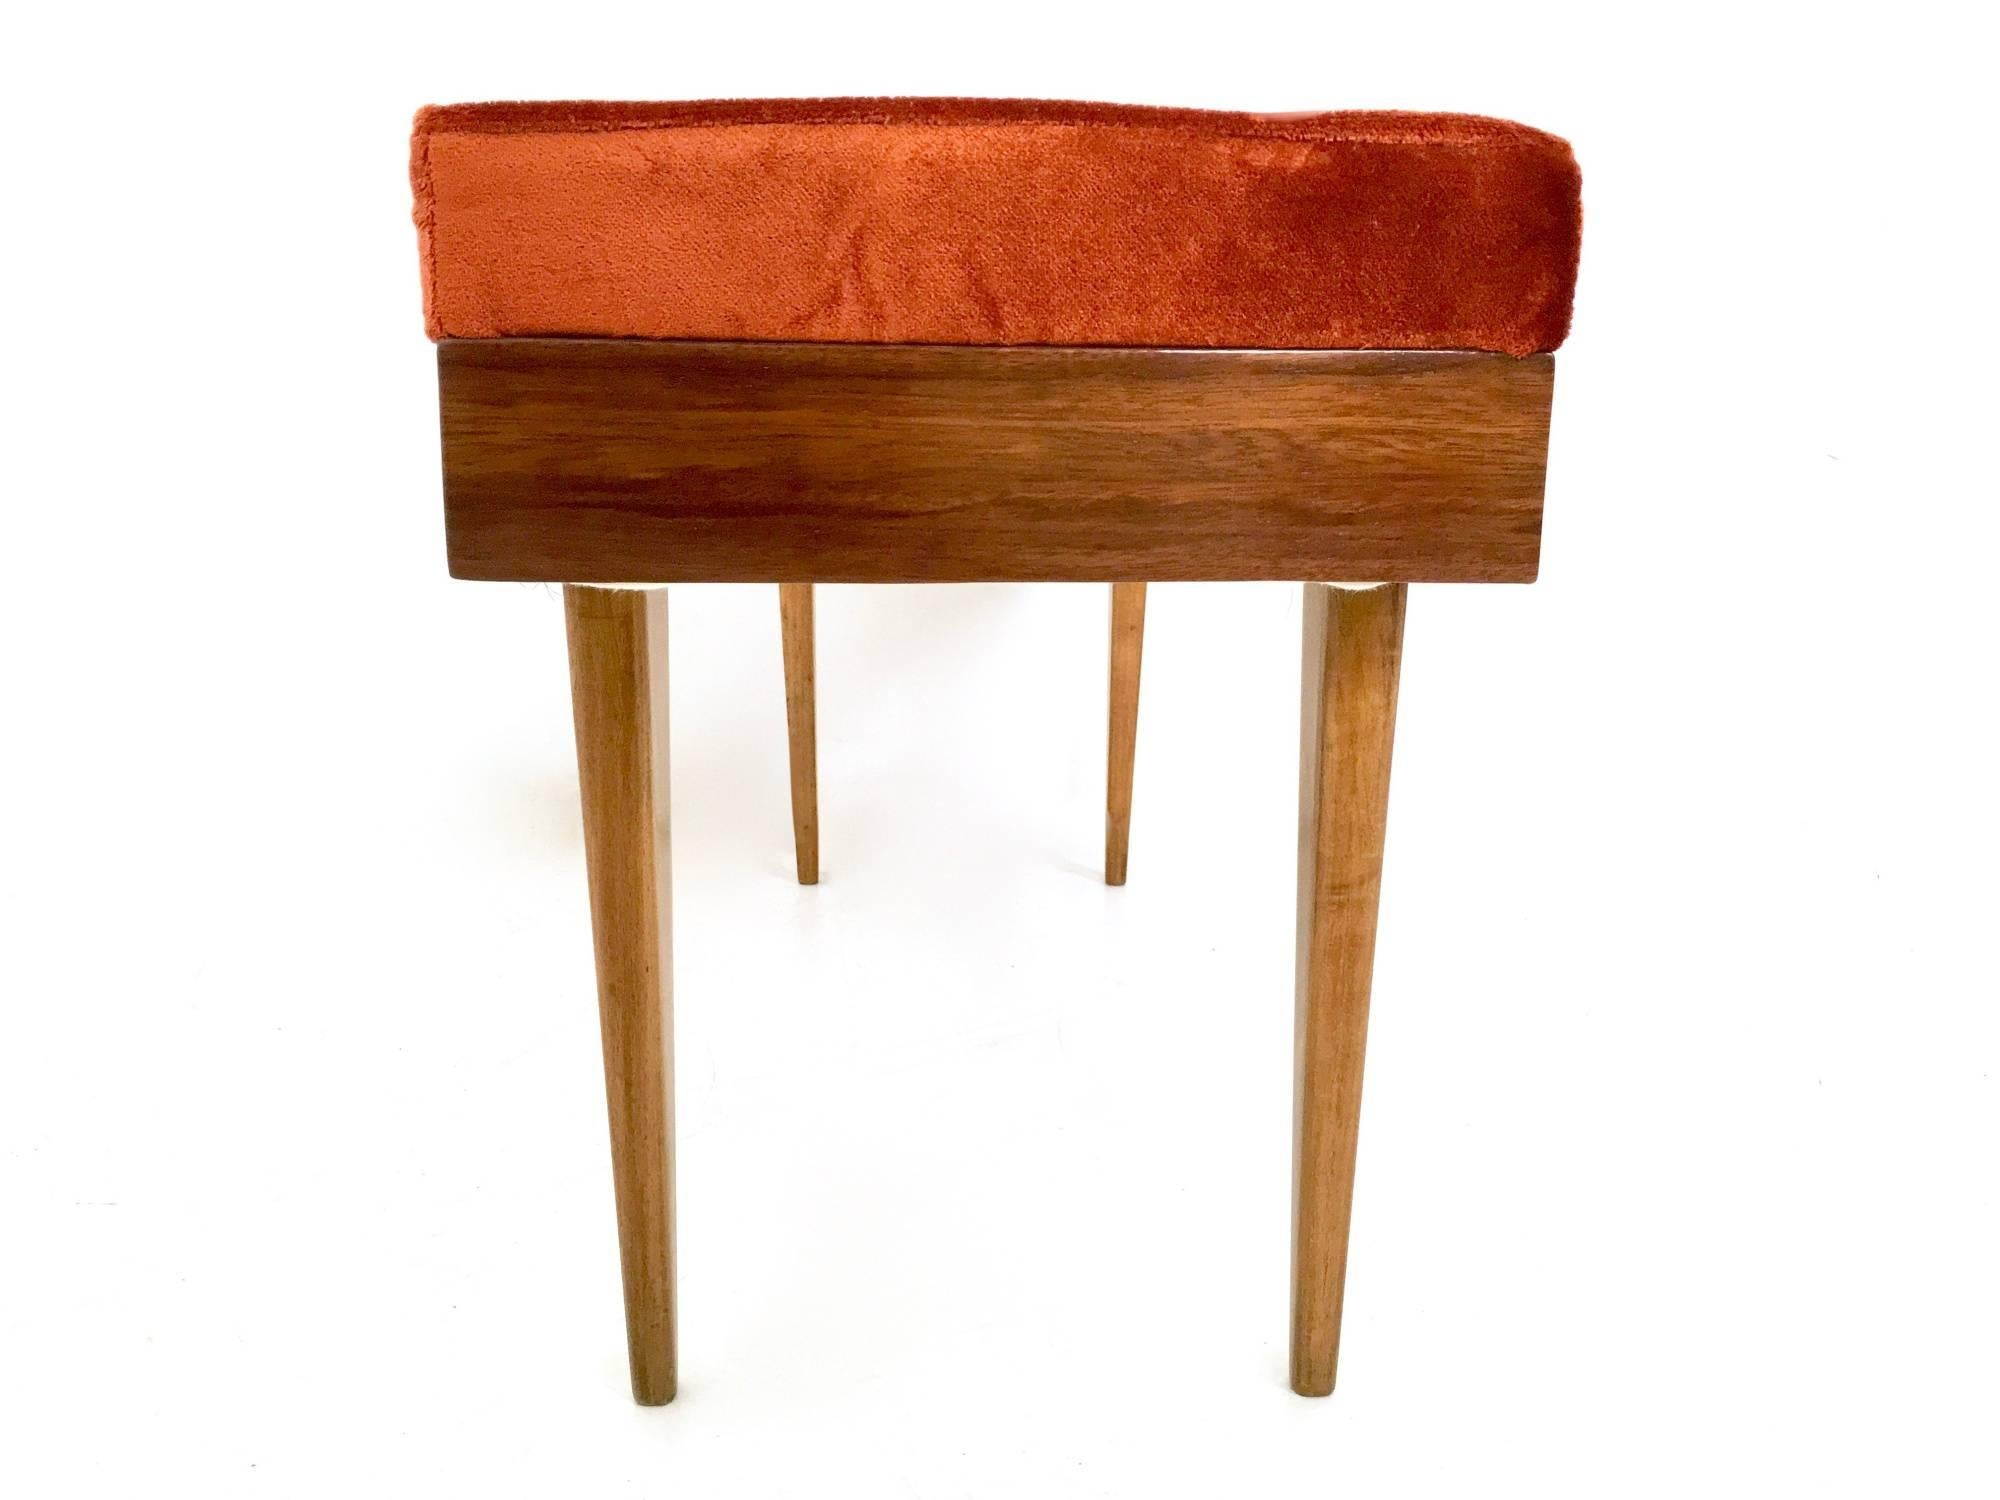 Mid-20th Century Wooden Bench with Orange Fabric Upholstery, Italy, 1950s